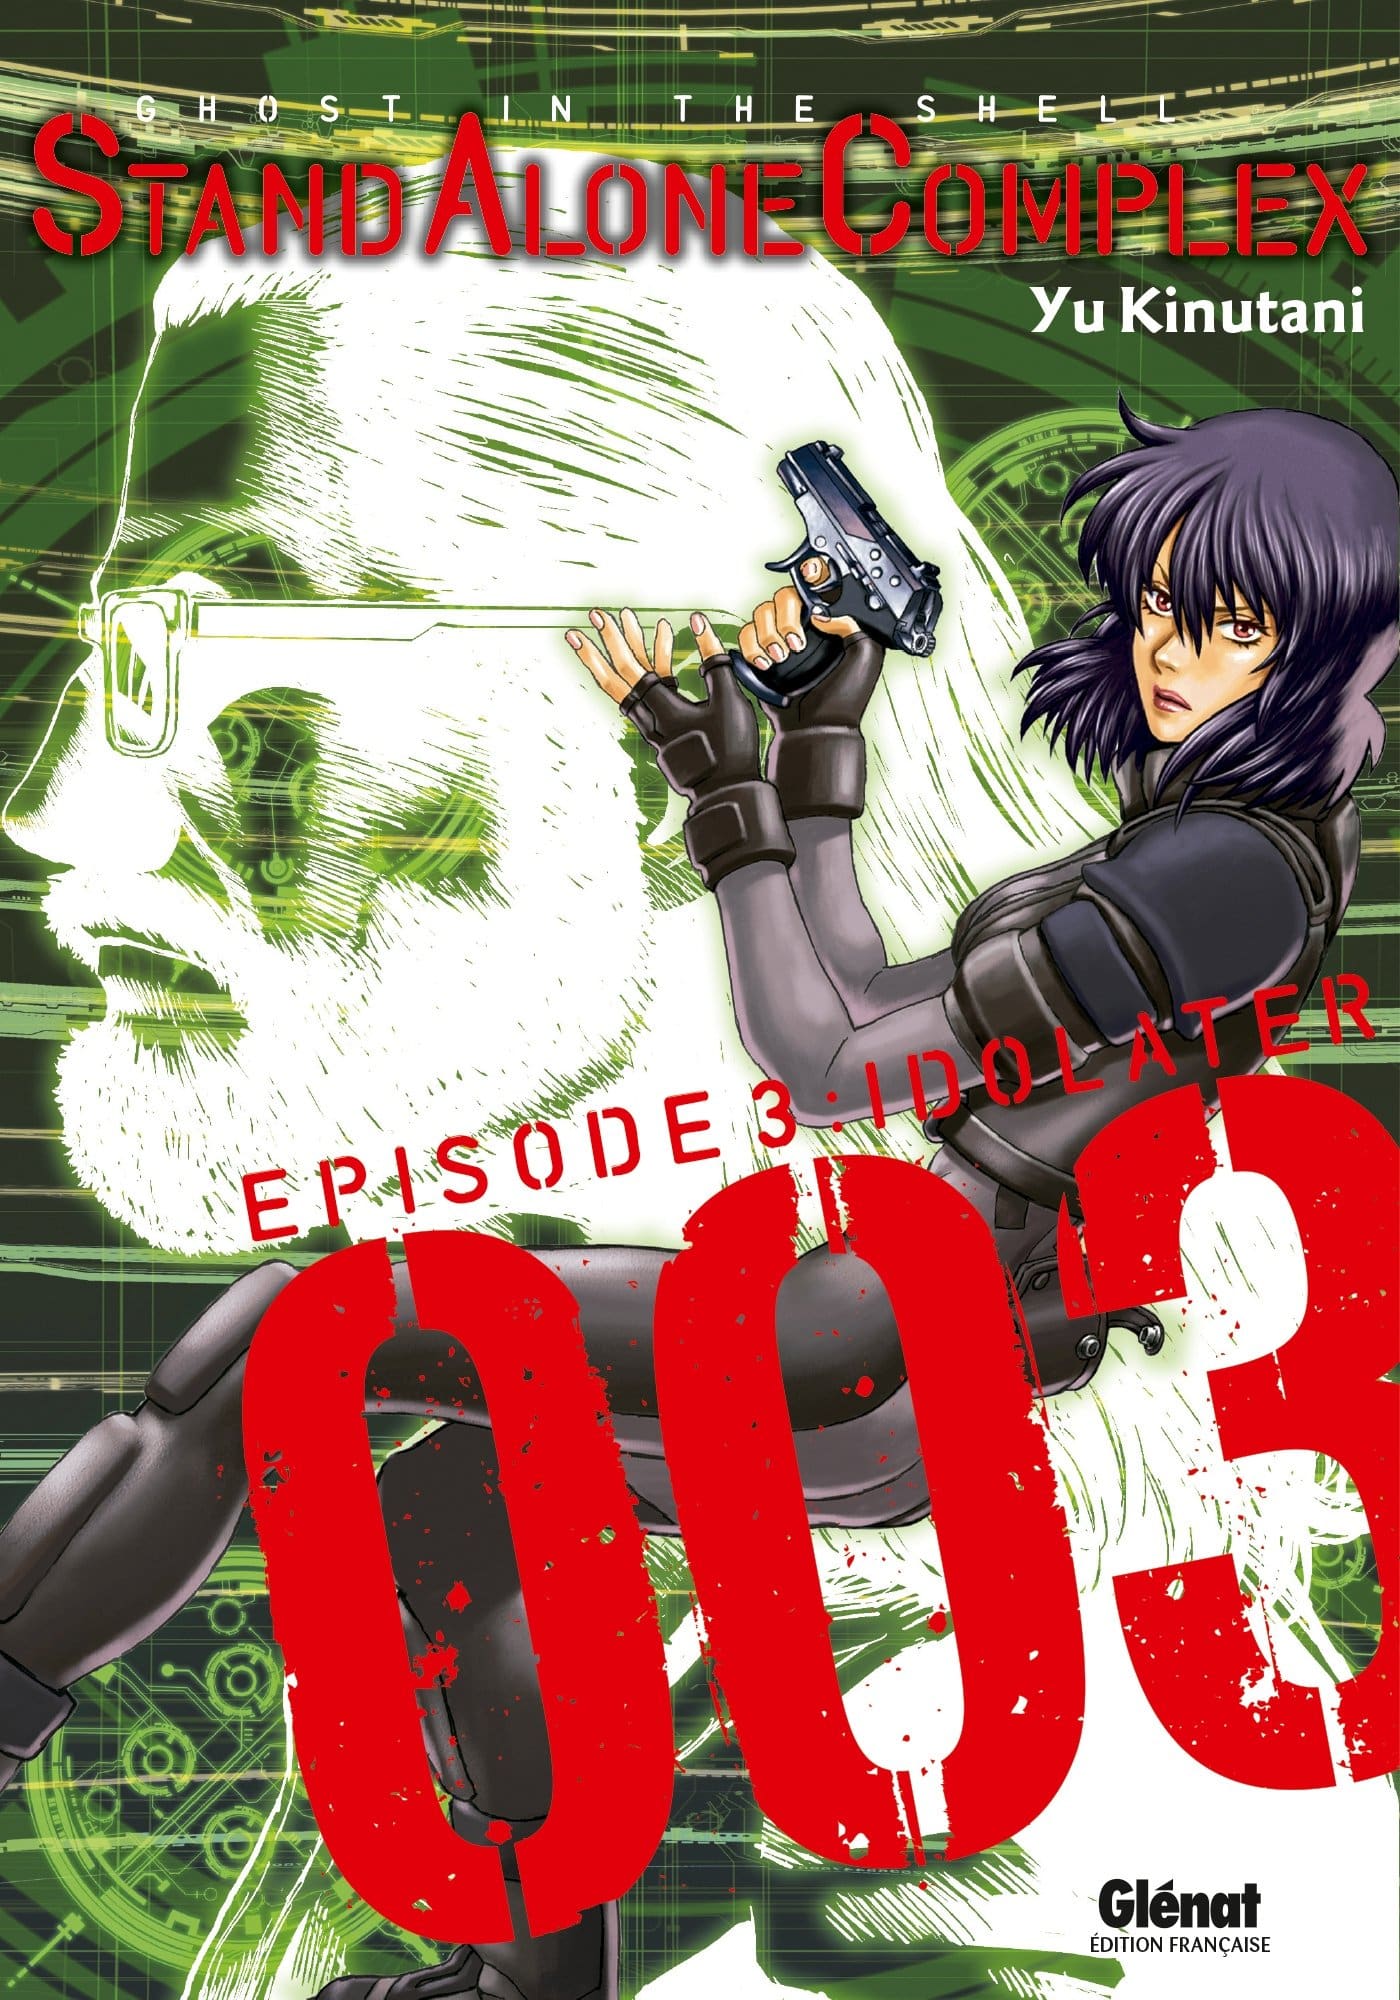 Tome 3 du manga Ghost in the Shell : Stand Alone Complex